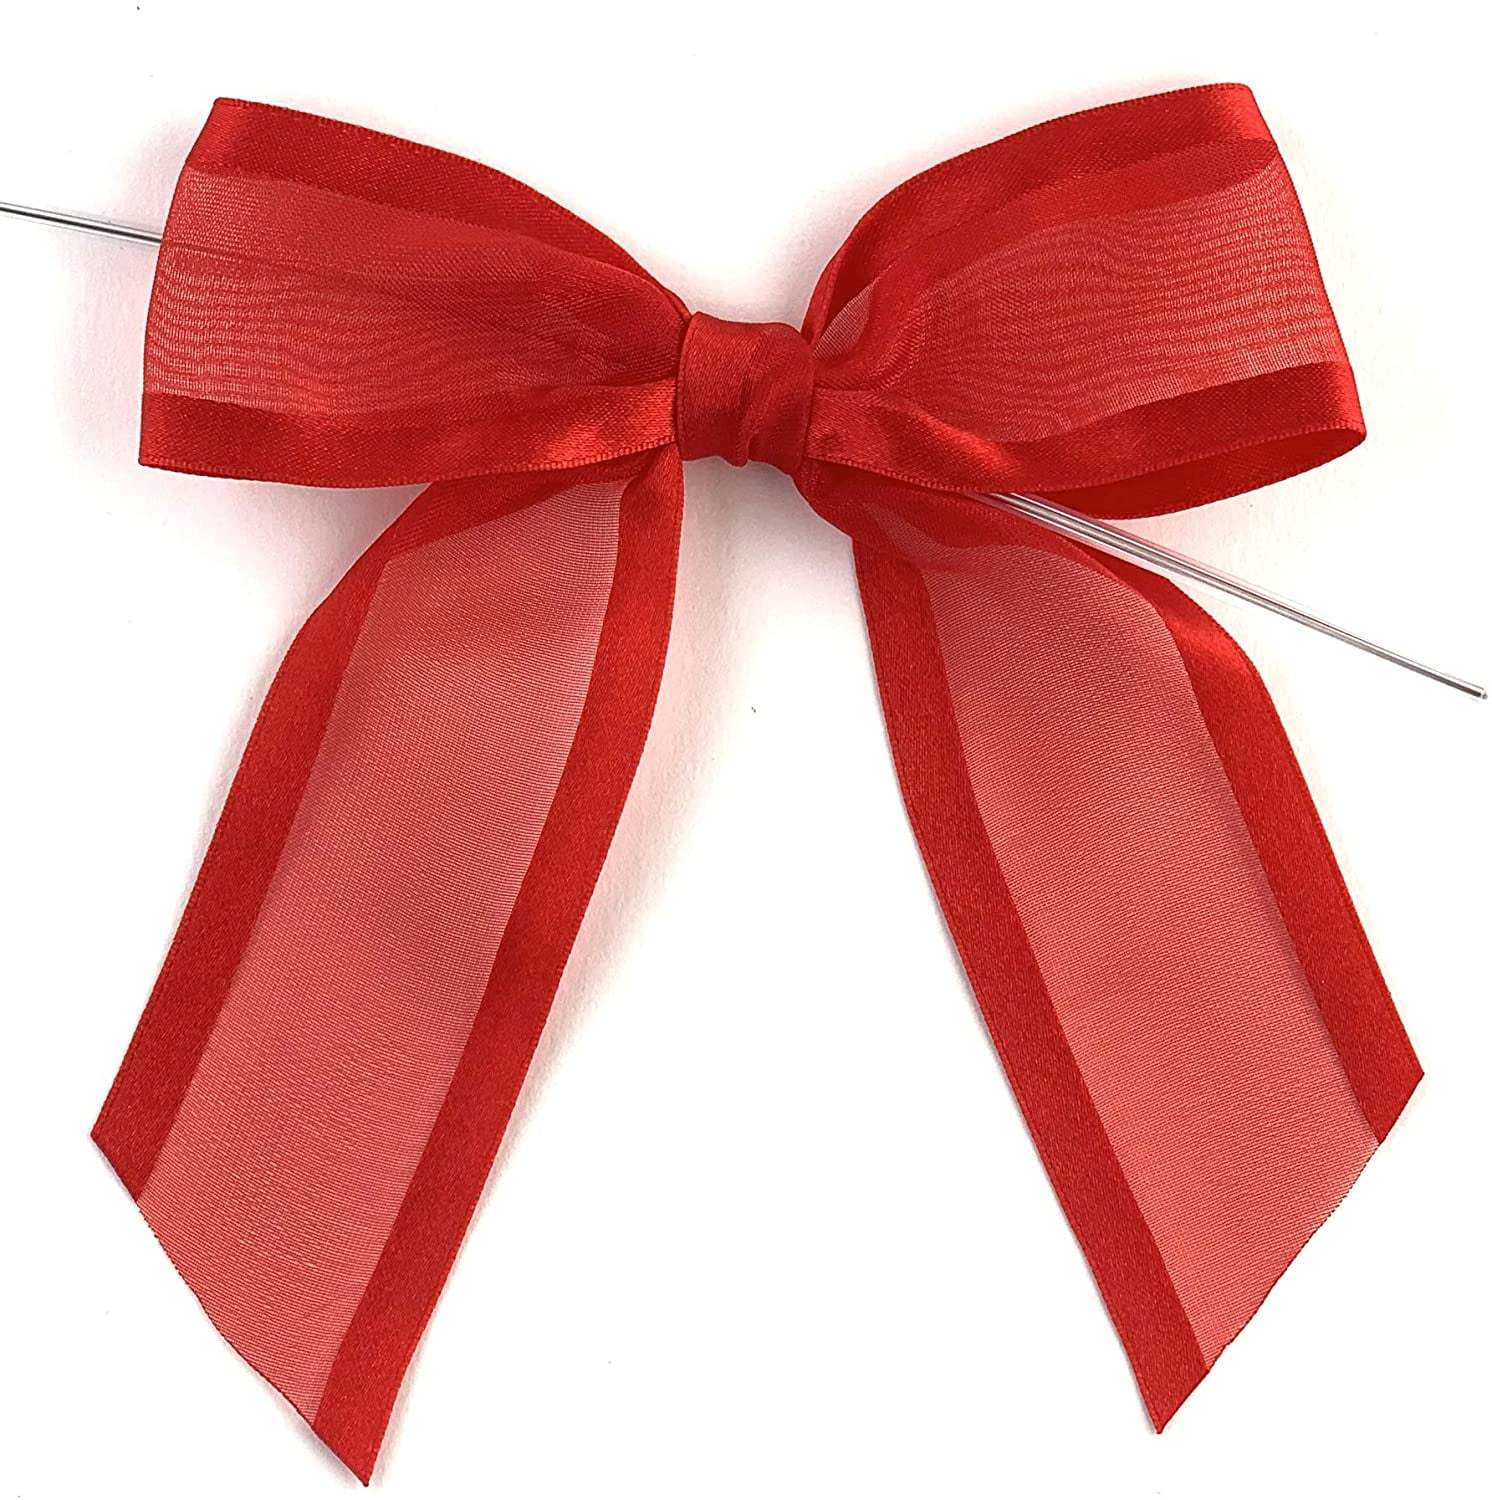 KEYIDO®10 Pcs Extra Large Red Bows for Gift Wrapping 70mm Wide